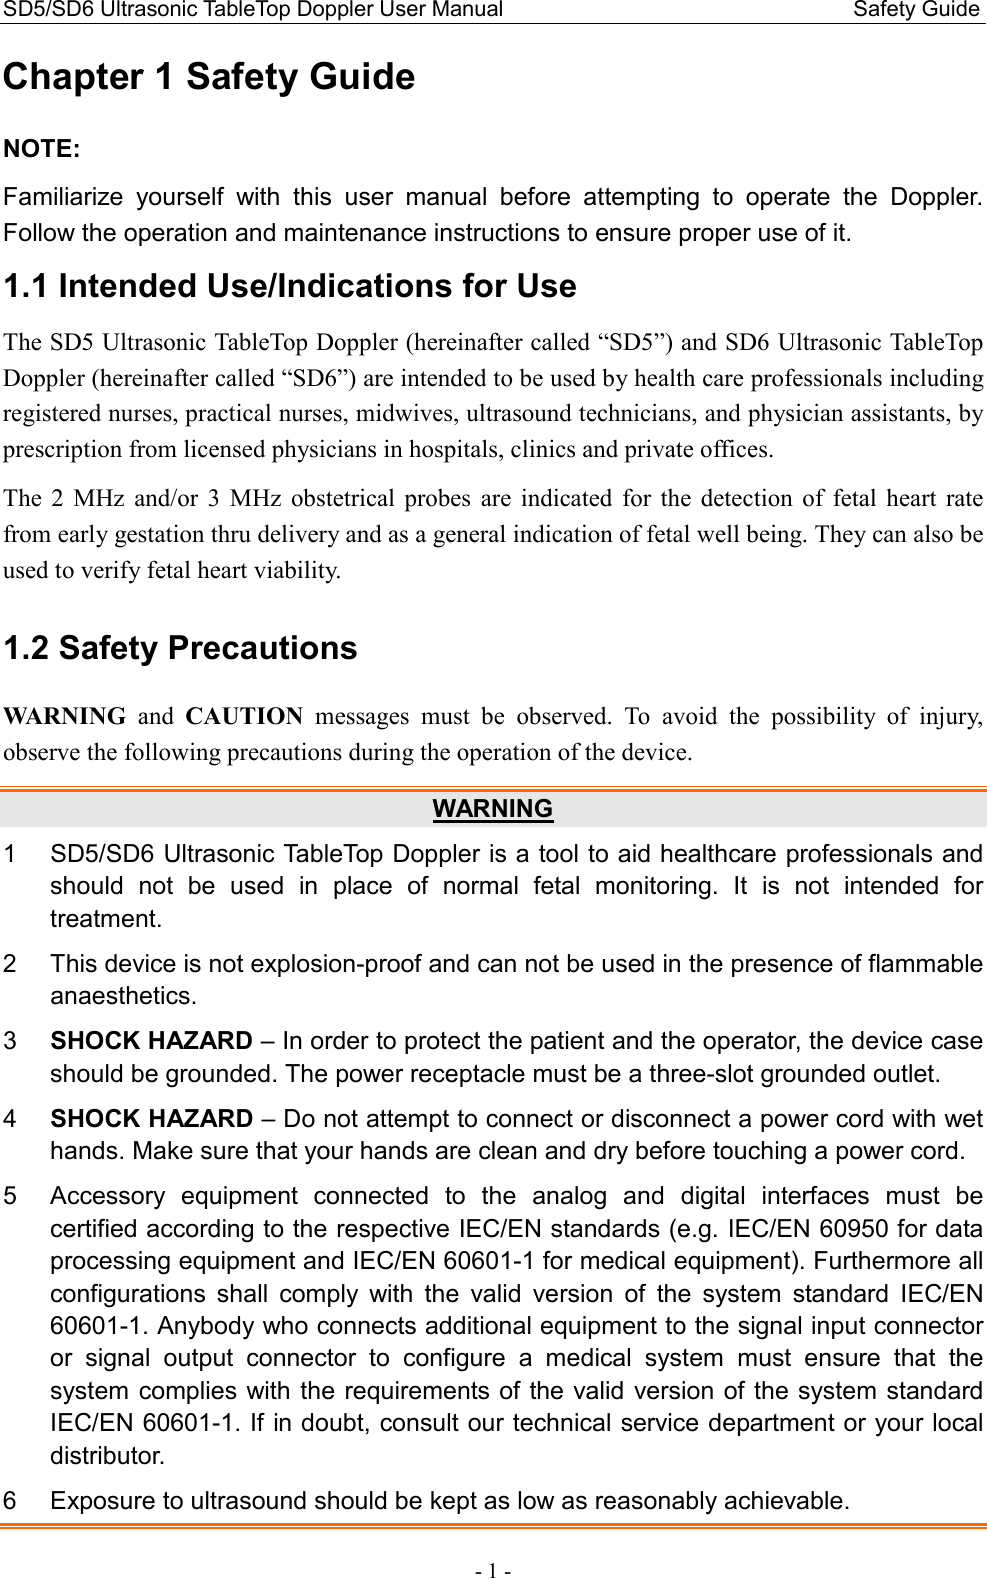 SD5/SD6 Ultrasonic TableTop Doppler User Manual                                                                Safety Guide - 1 - Chapter 1 Safety Guide NOTE: Familiarize  yourself  with  this  user  manual  before  attempting  to  operate  the  Doppler. Follow the operation and maintenance instructions to ensure proper use of it. 1.1 Intended Use/Indications for Use The SD5 Ultrasonic TableTop Doppler (hereinafter called “SD5”) and SD6 Ultrasonic TableTop Doppler (hereinafter called “SD6”) are intended to be used by health care professionals including registered nurses, practical nurses, midwives, ultrasound technicians, and physician assistants, by prescription from licensed physicians in hospitals, clinics and private offices. The  2  MHz  and/or  3  MHz  obstetrical  probes  are  indicated  for  the  detection  of  fetal  heart  rate from early gestation thru delivery and as a general indication of fetal well being. They can also be used to verify fetal heart viability. 1.2 Safety Precautions WARNING  and  CAUTION  messages  must  be  observed.  To  avoid  the  possibility  of  injury, observe the following precautions during the operation of the device. WARNING 1  SD5/SD6 Ultrasonic TableTop Doppler is a tool to aid healthcare professionals and should  not  be  used  in  place  of  normal  fetal  monitoring.  It  is  not  intended  for treatment. 2  This device is not explosion-proof and can not be used in the presence of flammable anaesthetics. 3  SHOCK HAZARD – In order to protect the patient and the operator, the device case should be grounded. The power receptacle must be a three-slot grounded outlet. 4  SHOCK HAZARD – Do not attempt to connect or disconnect a power cord with wet hands. Make sure that your hands are clean and dry before touching a power cord. 5  Accessory  equipment  connected  to  the  analog  and  digital  interfaces  must  be certified according to the respective IEC/EN standards (e.g. IEC/EN 60950 for data processing equipment and IEC/EN 60601-1 for medical equipment). Furthermore all configurations  shall  comply  with  the  valid  version  of  the  system  standard  IEC/EN 60601-1. Anybody who connects additional equipment to the signal input connector or  signal  output  connector  to  configure  a  medical  system  must  ensure  that  the system complies with the requirements of the valid version of the system standard IEC/EN 60601-1. If in doubt, consult our technical service department or your local distributor. 6  Exposure to ultrasound should be kept as low as reasonably achievable. 